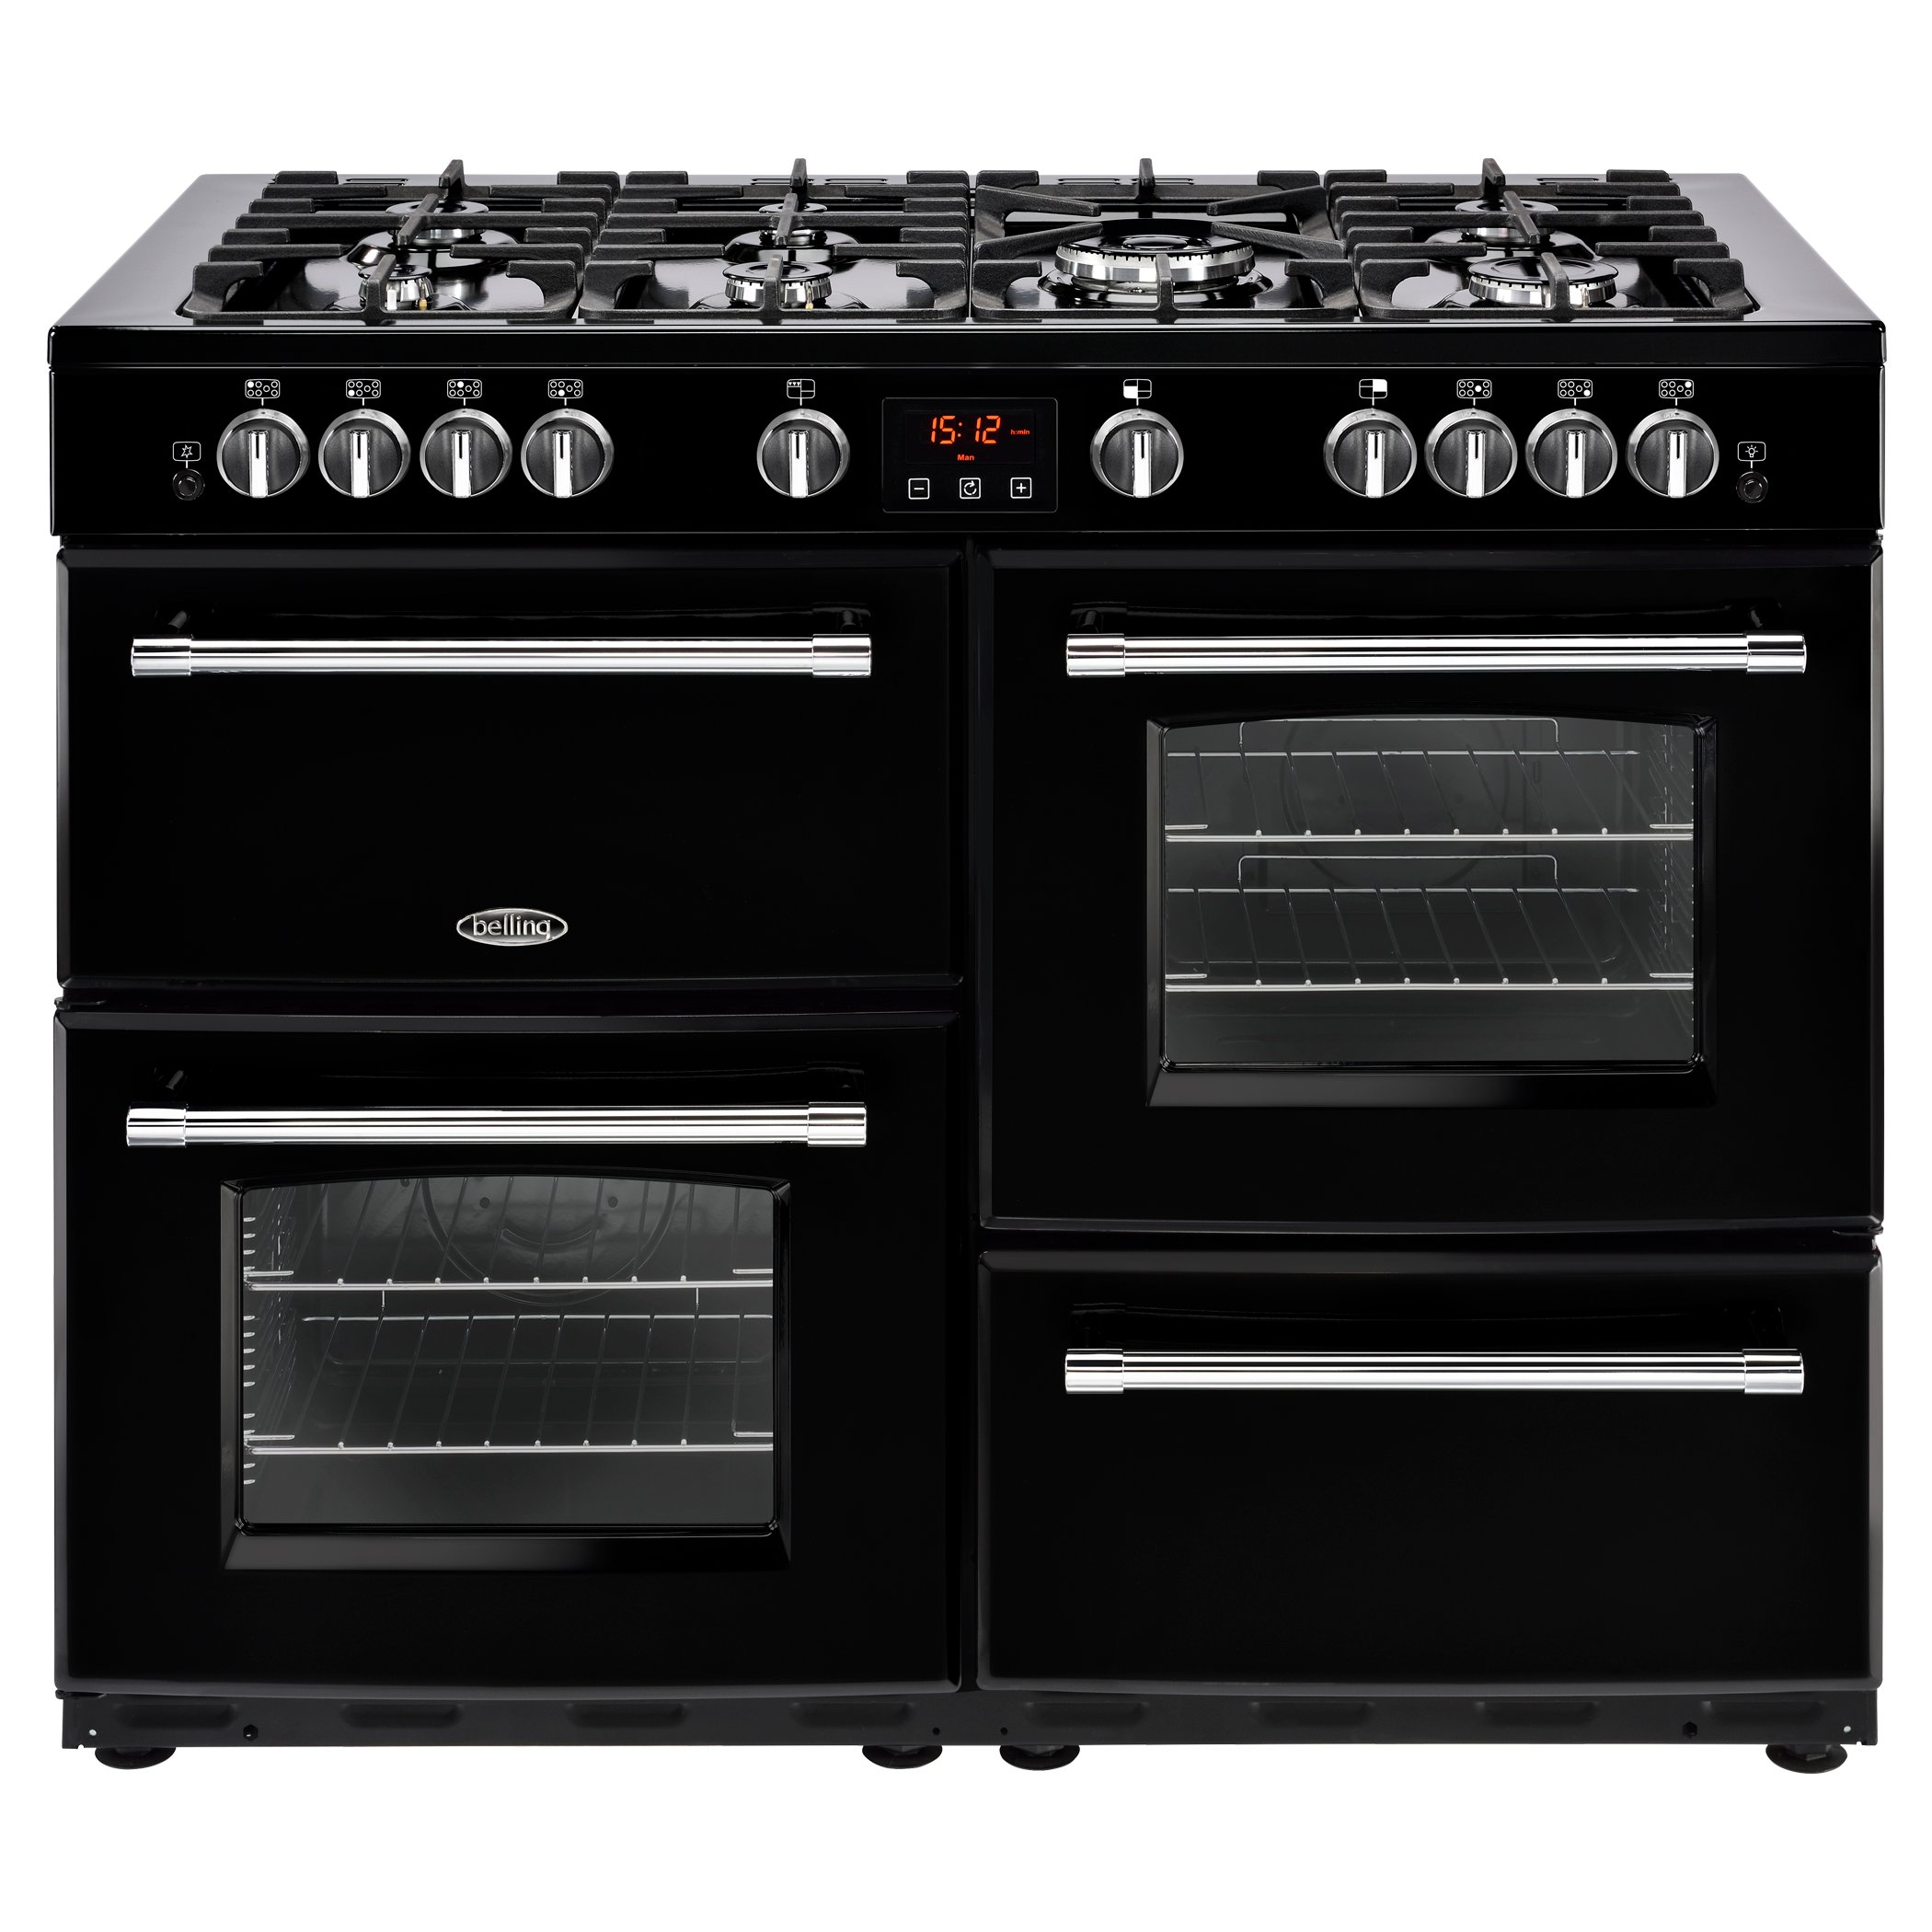 110cm gas range cooker with 7 burner gas hob with 4kW PowerWok burner, Maxi-Clock and easy clean enamel.